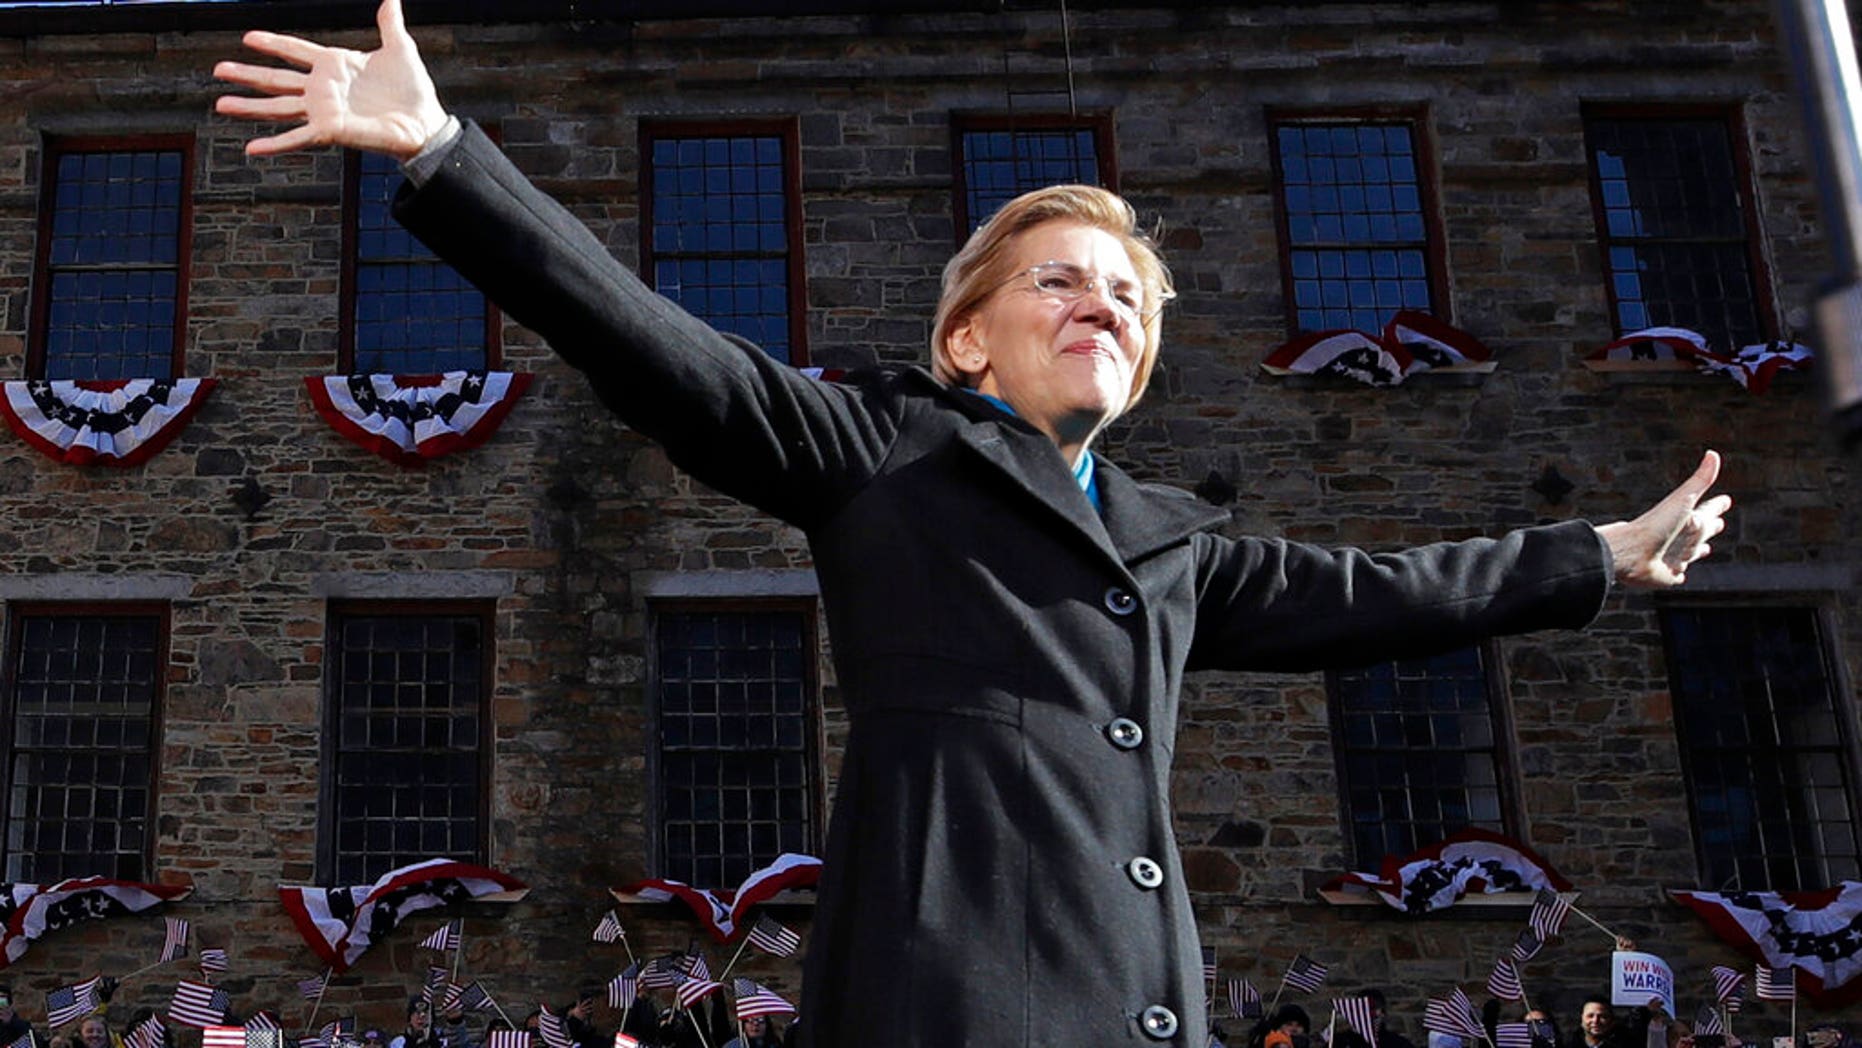 Senator Elizabeth Warren, D-Mass., Welcomes her encouragement as she gets on the scene at an event to officially launch her presidential campaign.